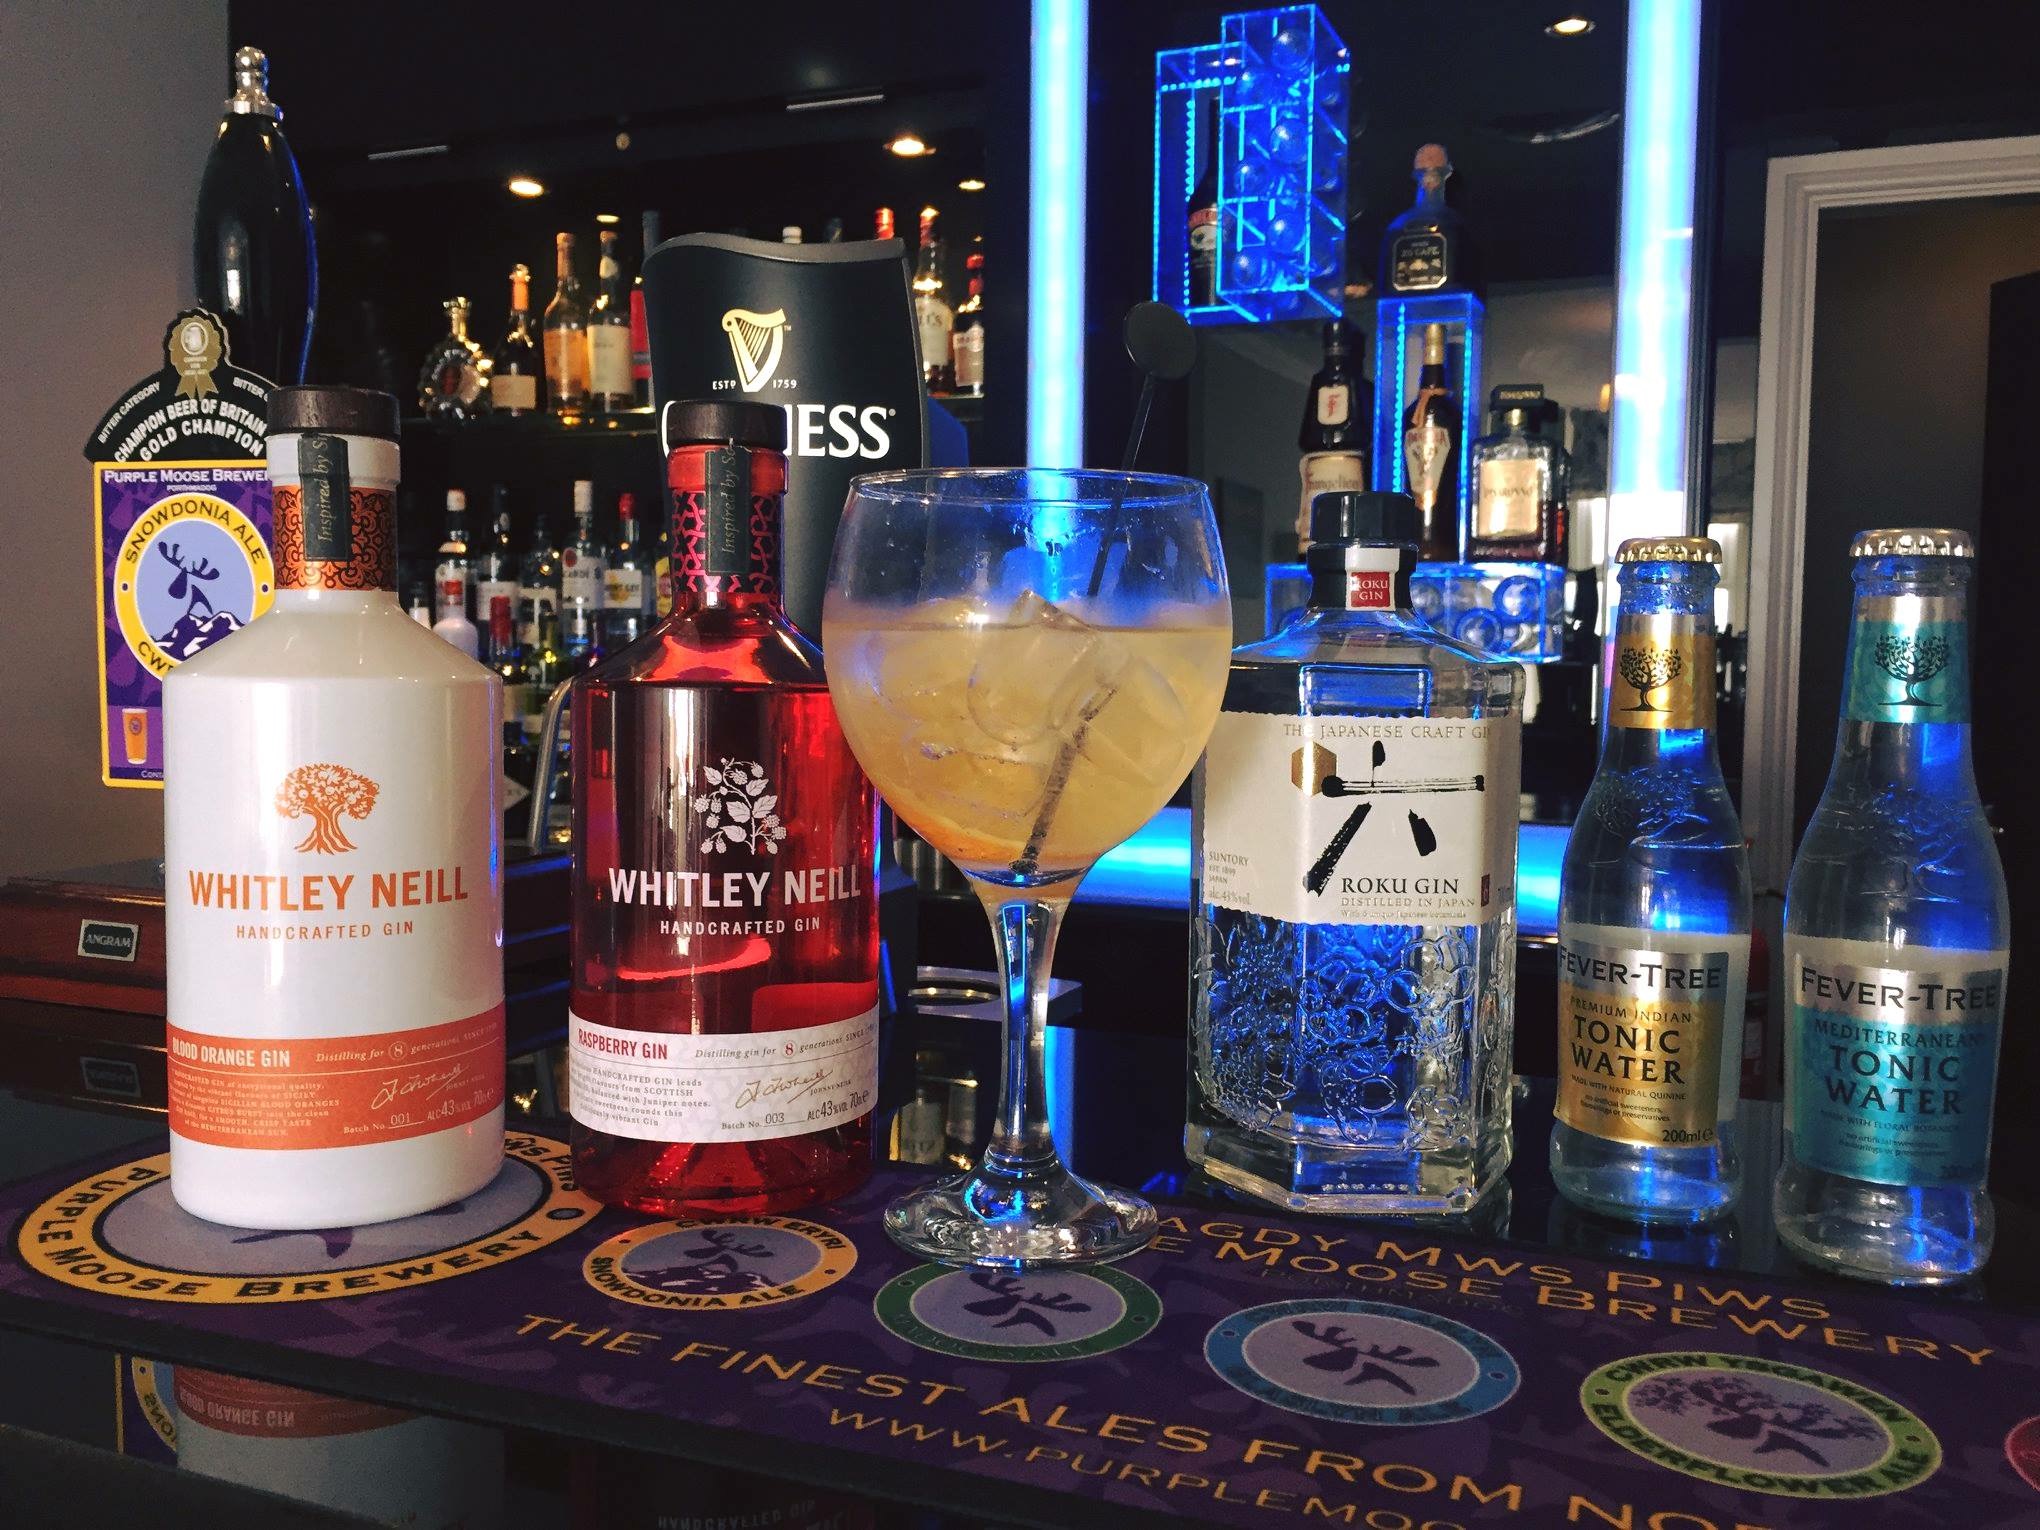 Bar - Large selections of gin available,